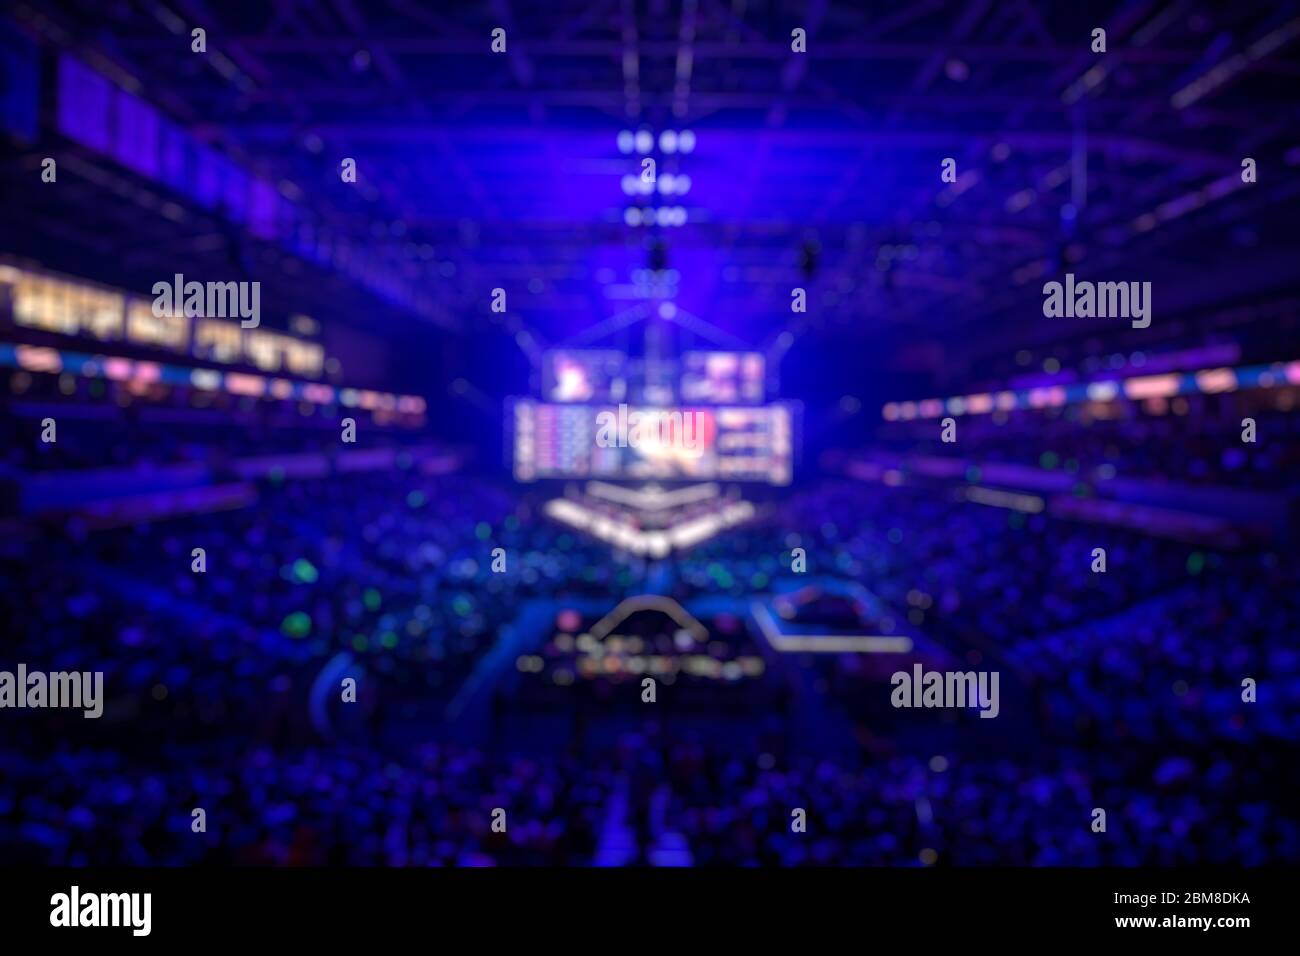 Blurred background of an esports event - Main stage venue, big screen and lights before the start of the tournament. Stock Photo